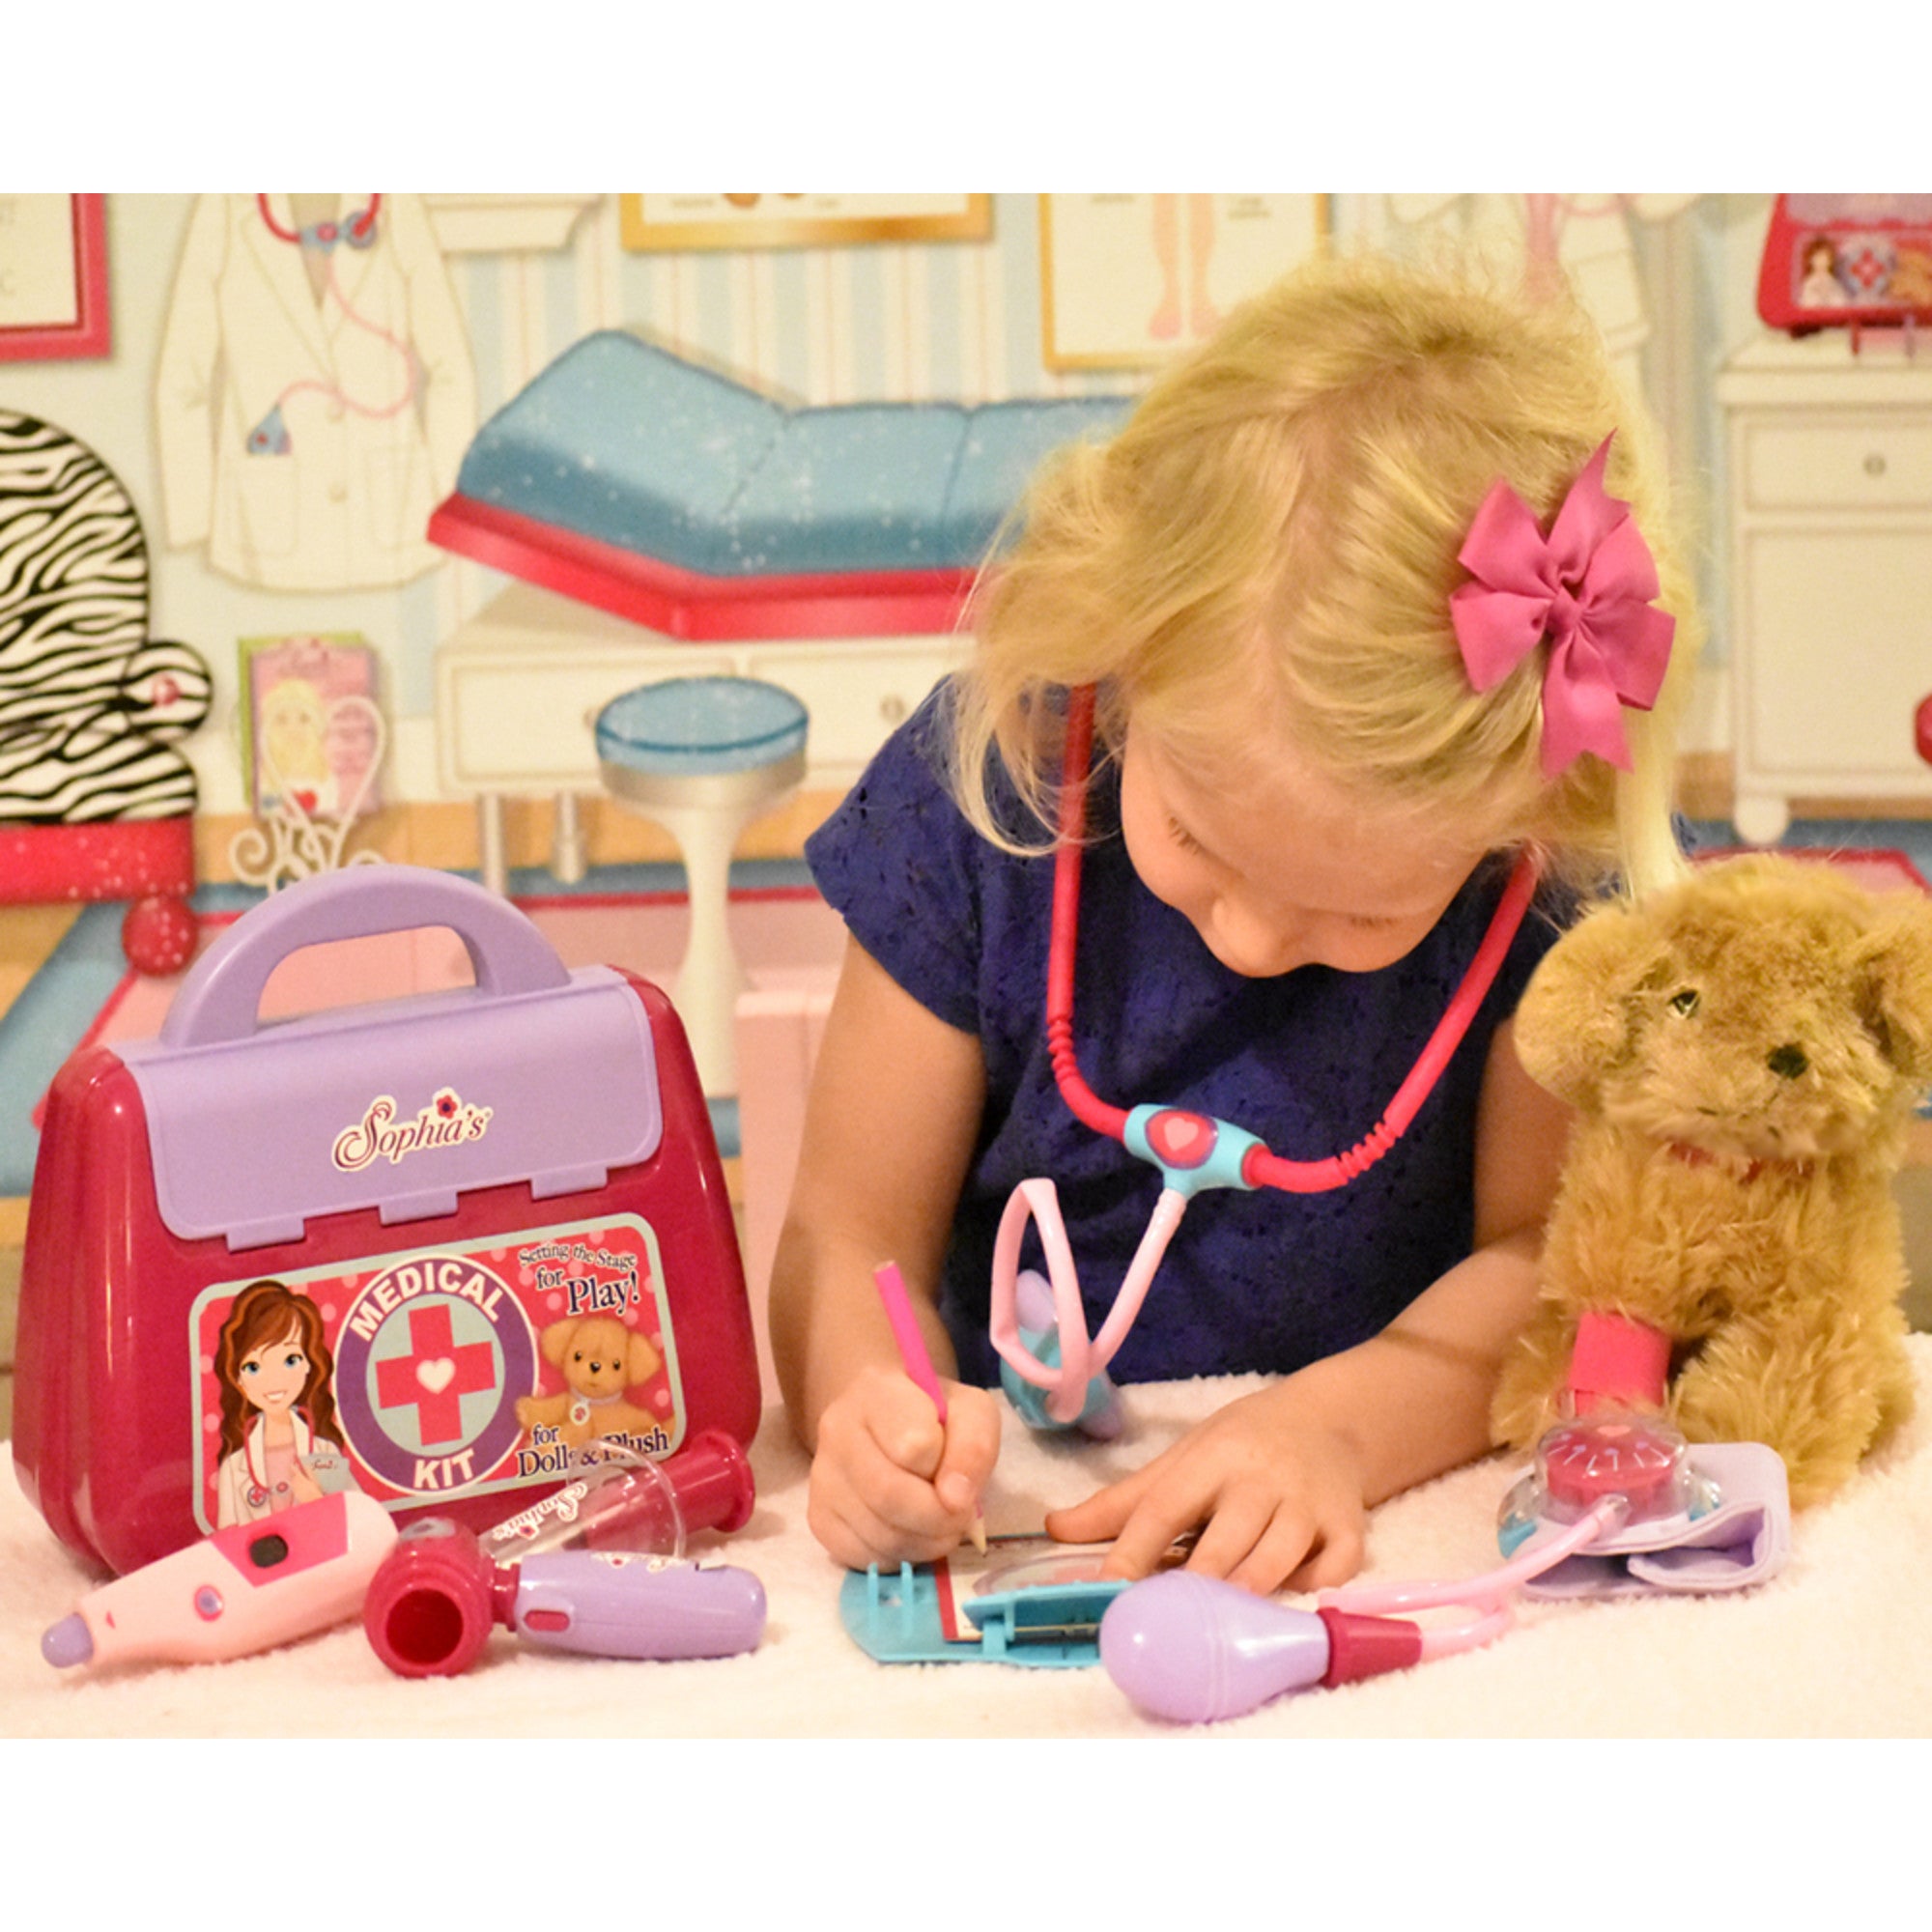 Sophia's - 18" Doll - Medical Kit for Dolls & Plush in Closed Color Box - Pink